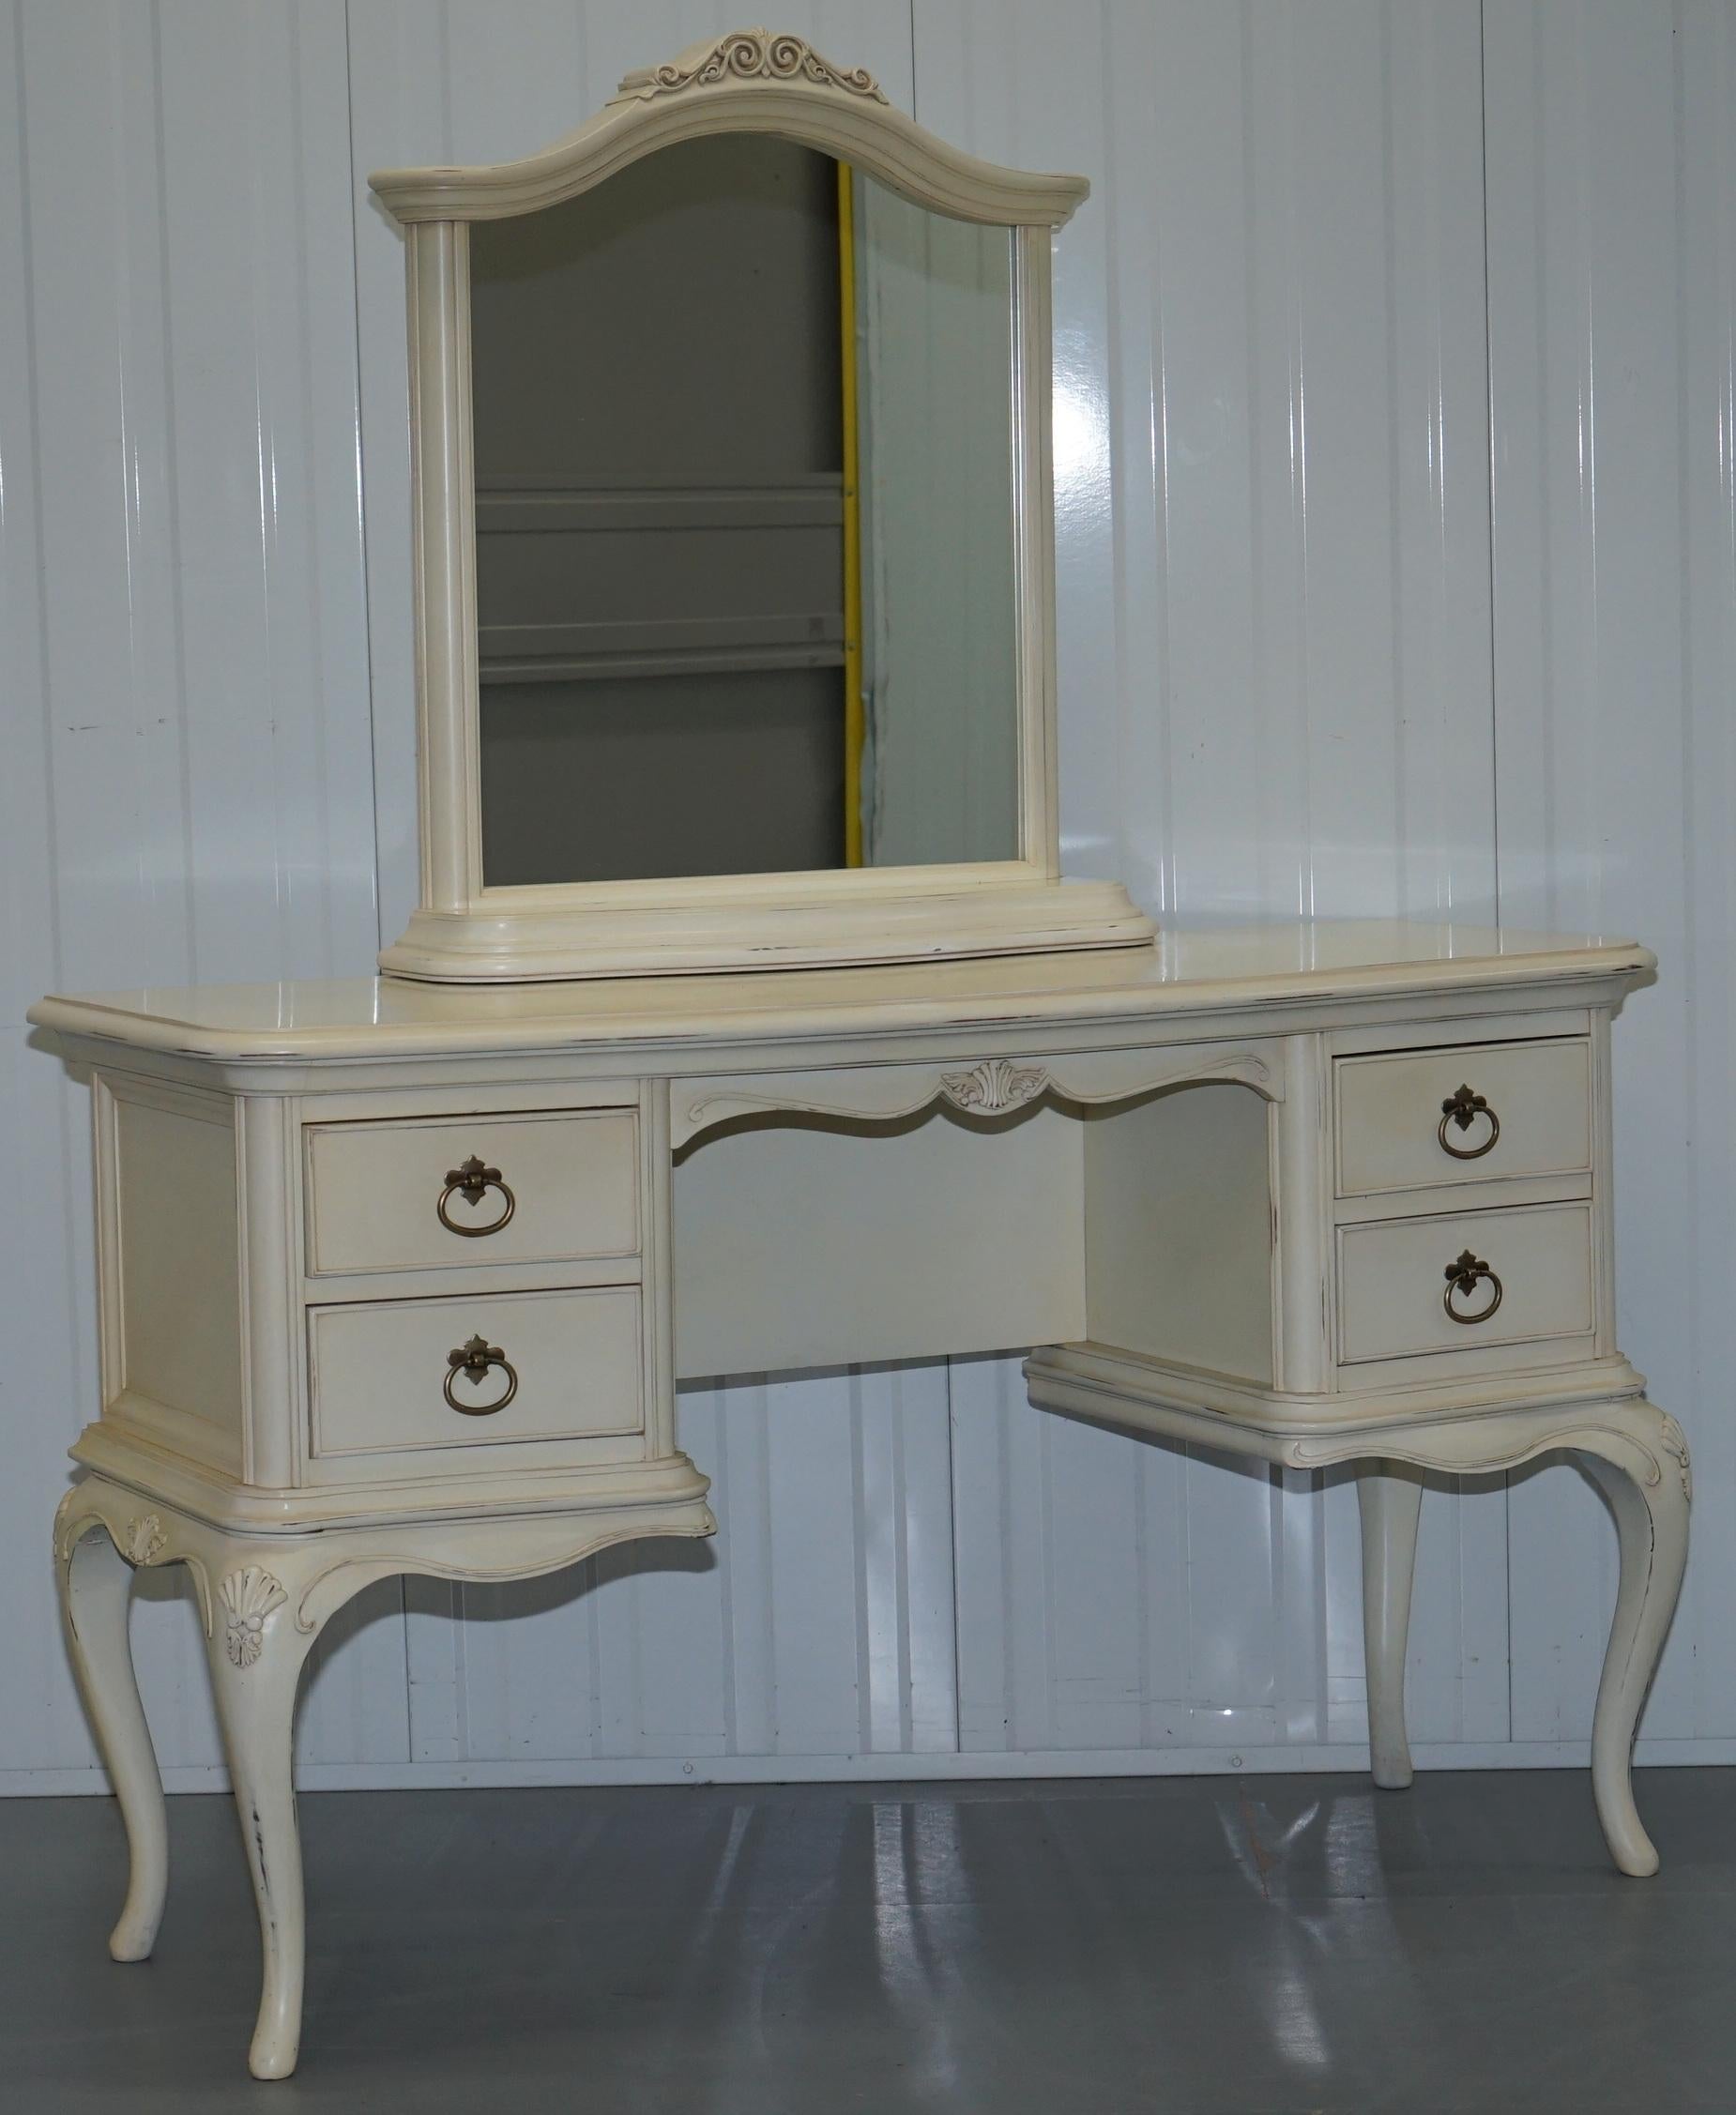 We are delighted to offer for sale this lovely Willis and Gambier Ivory collection solid beechwood dressing table chair and mirror

The Ivory bedroom collection is crafted from solid Birch and Birch veneers combined with a unique, hand-painted,